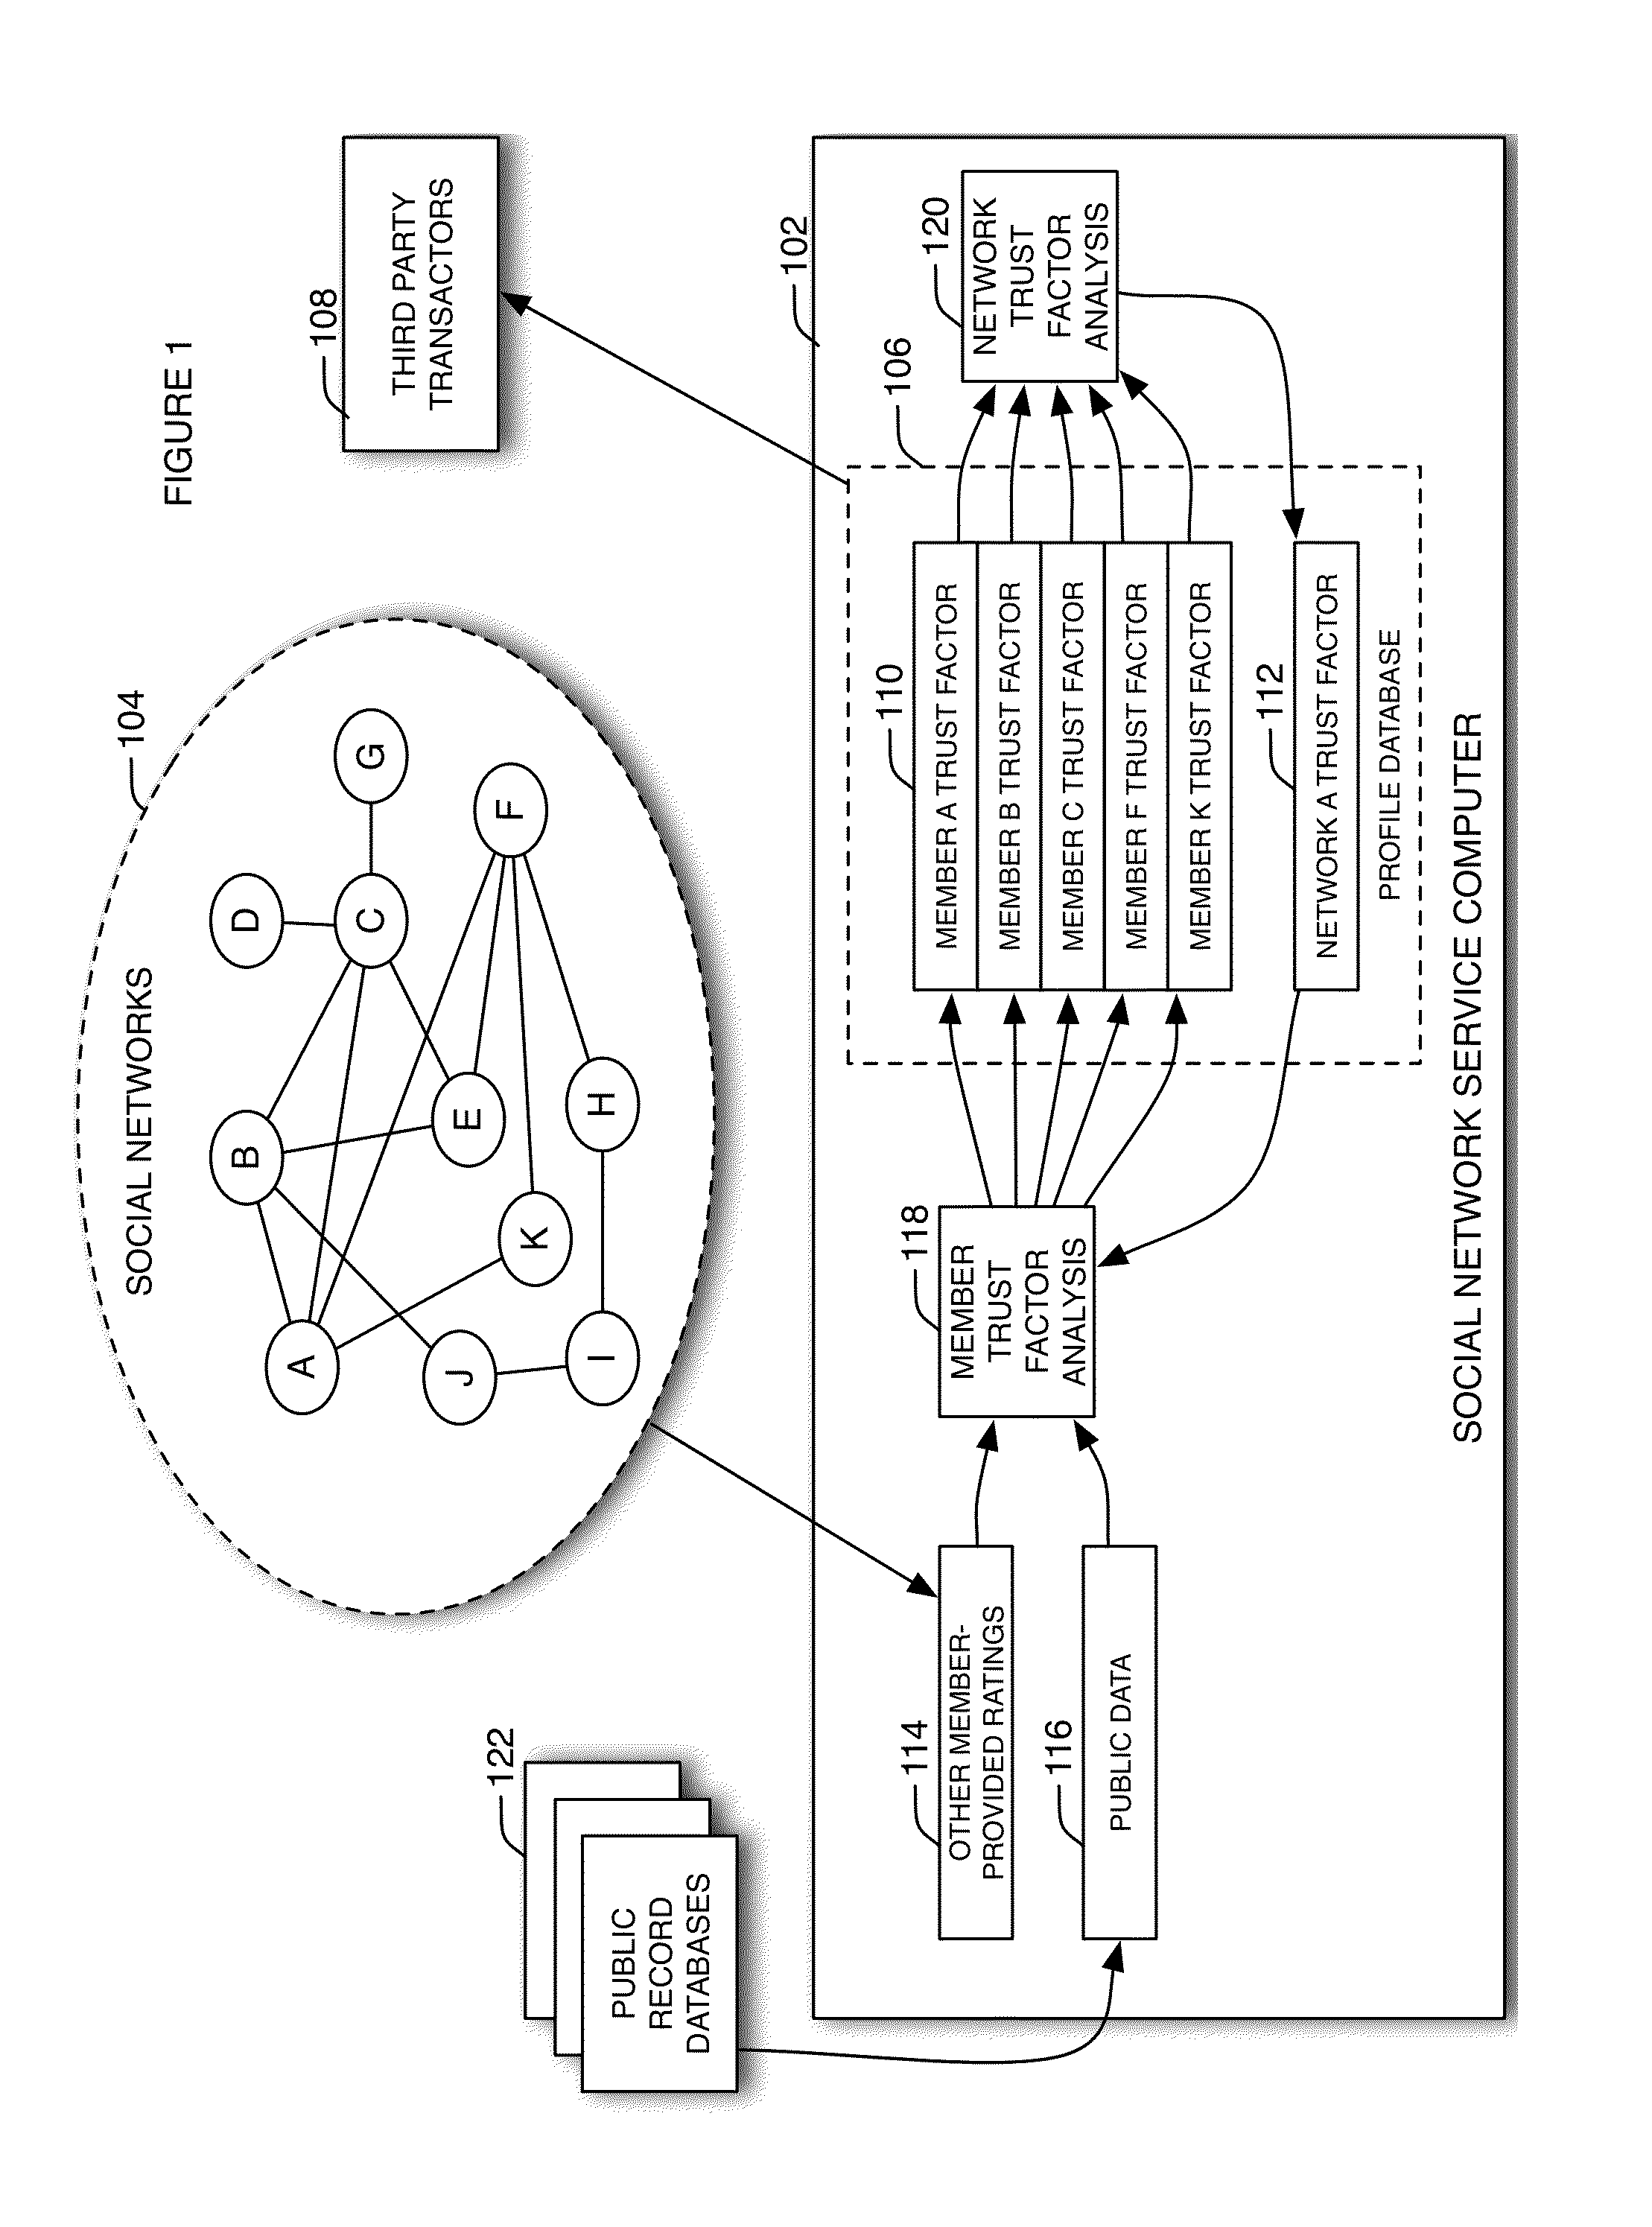 Method and system for providing trust analysis for members of a social network